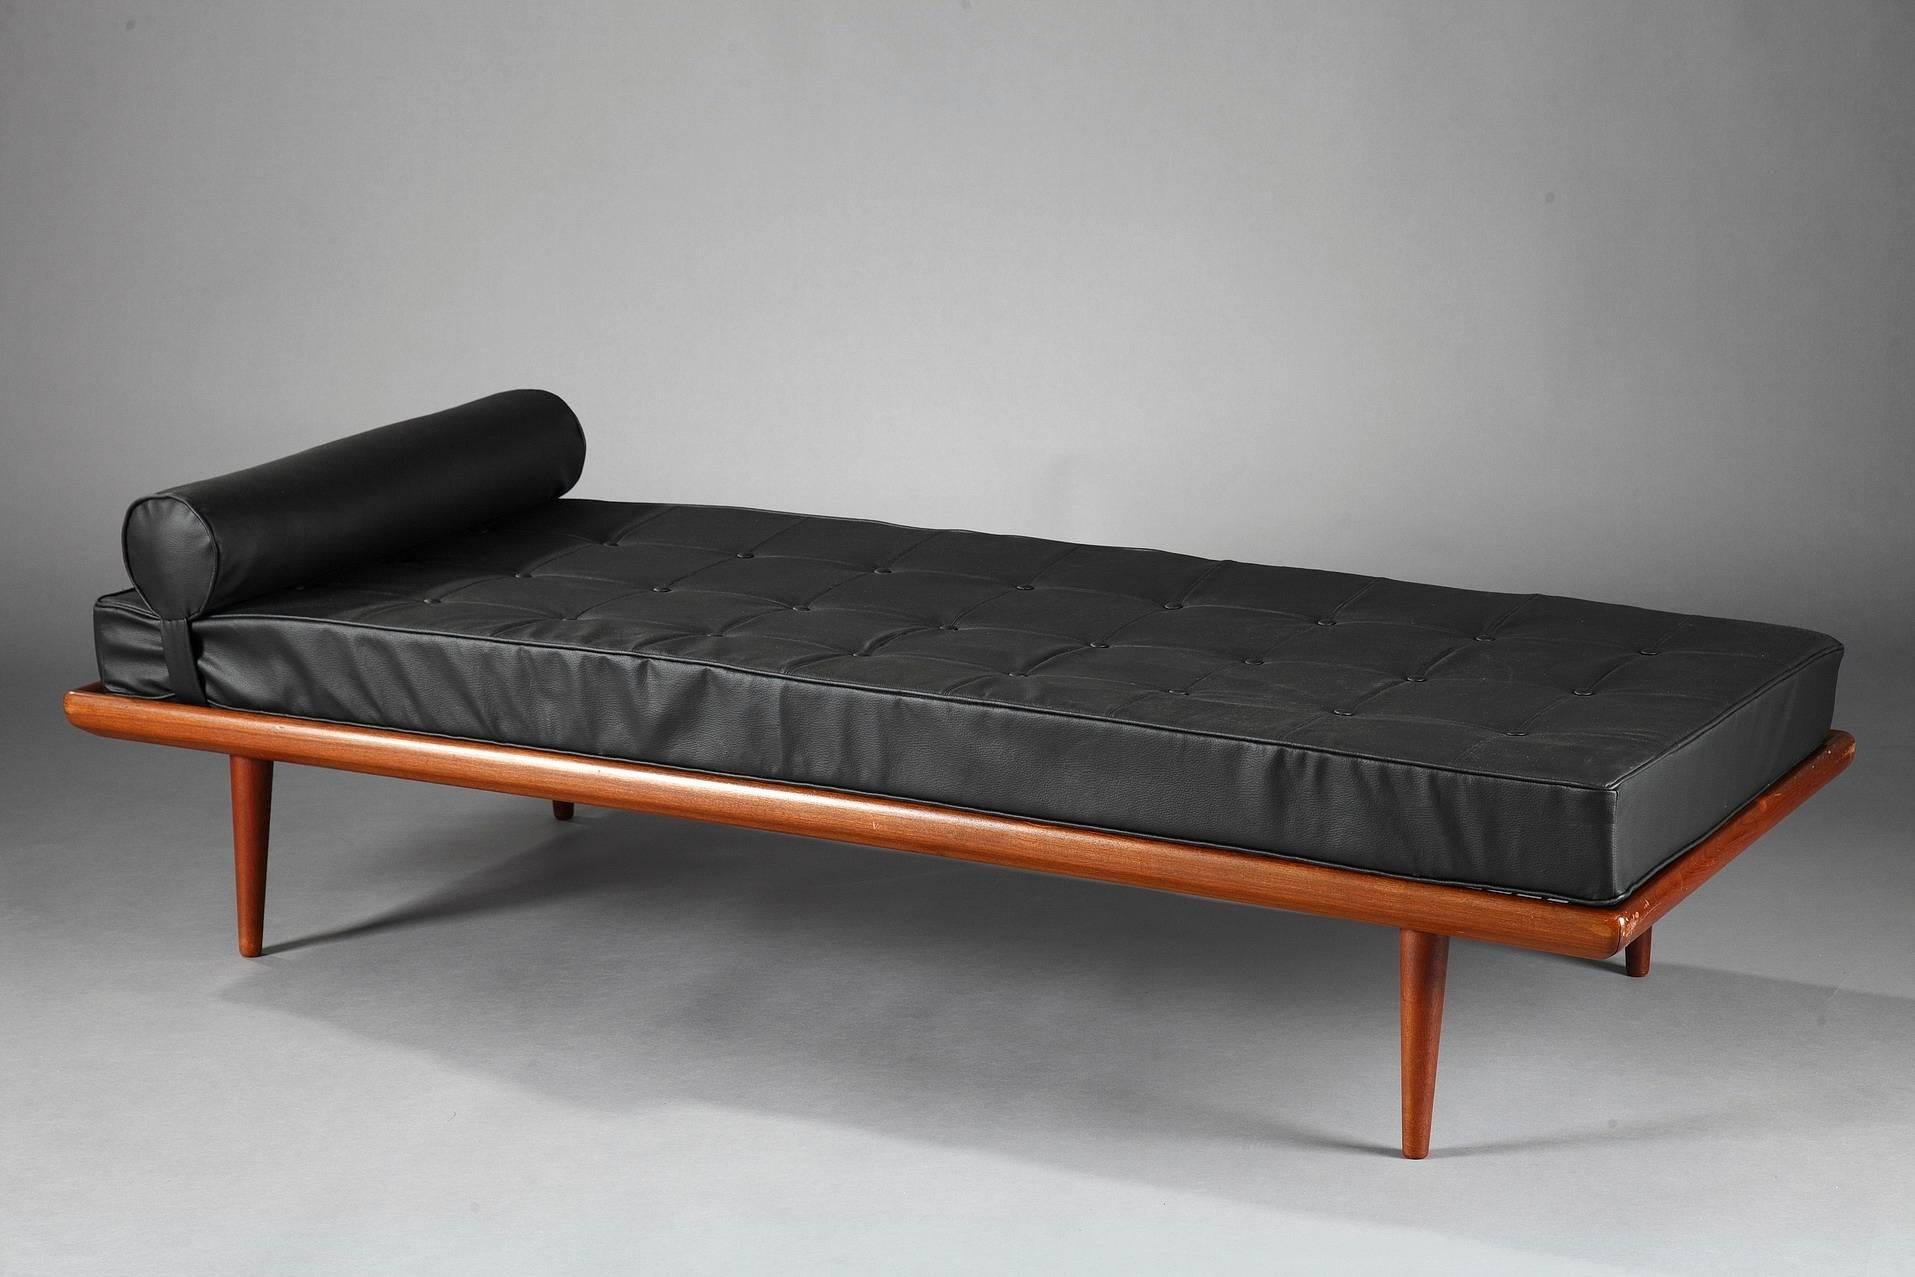 Midcentury daybed with wooden structure and black leatherette upholstered seat and cushion. Designed by Peter Hvidt (1916-1986) & Orla Mølgaard Nielsen (1907-1993). Manufactured by France & Daverkosen, Denmark. The cushion is removable. Marked on